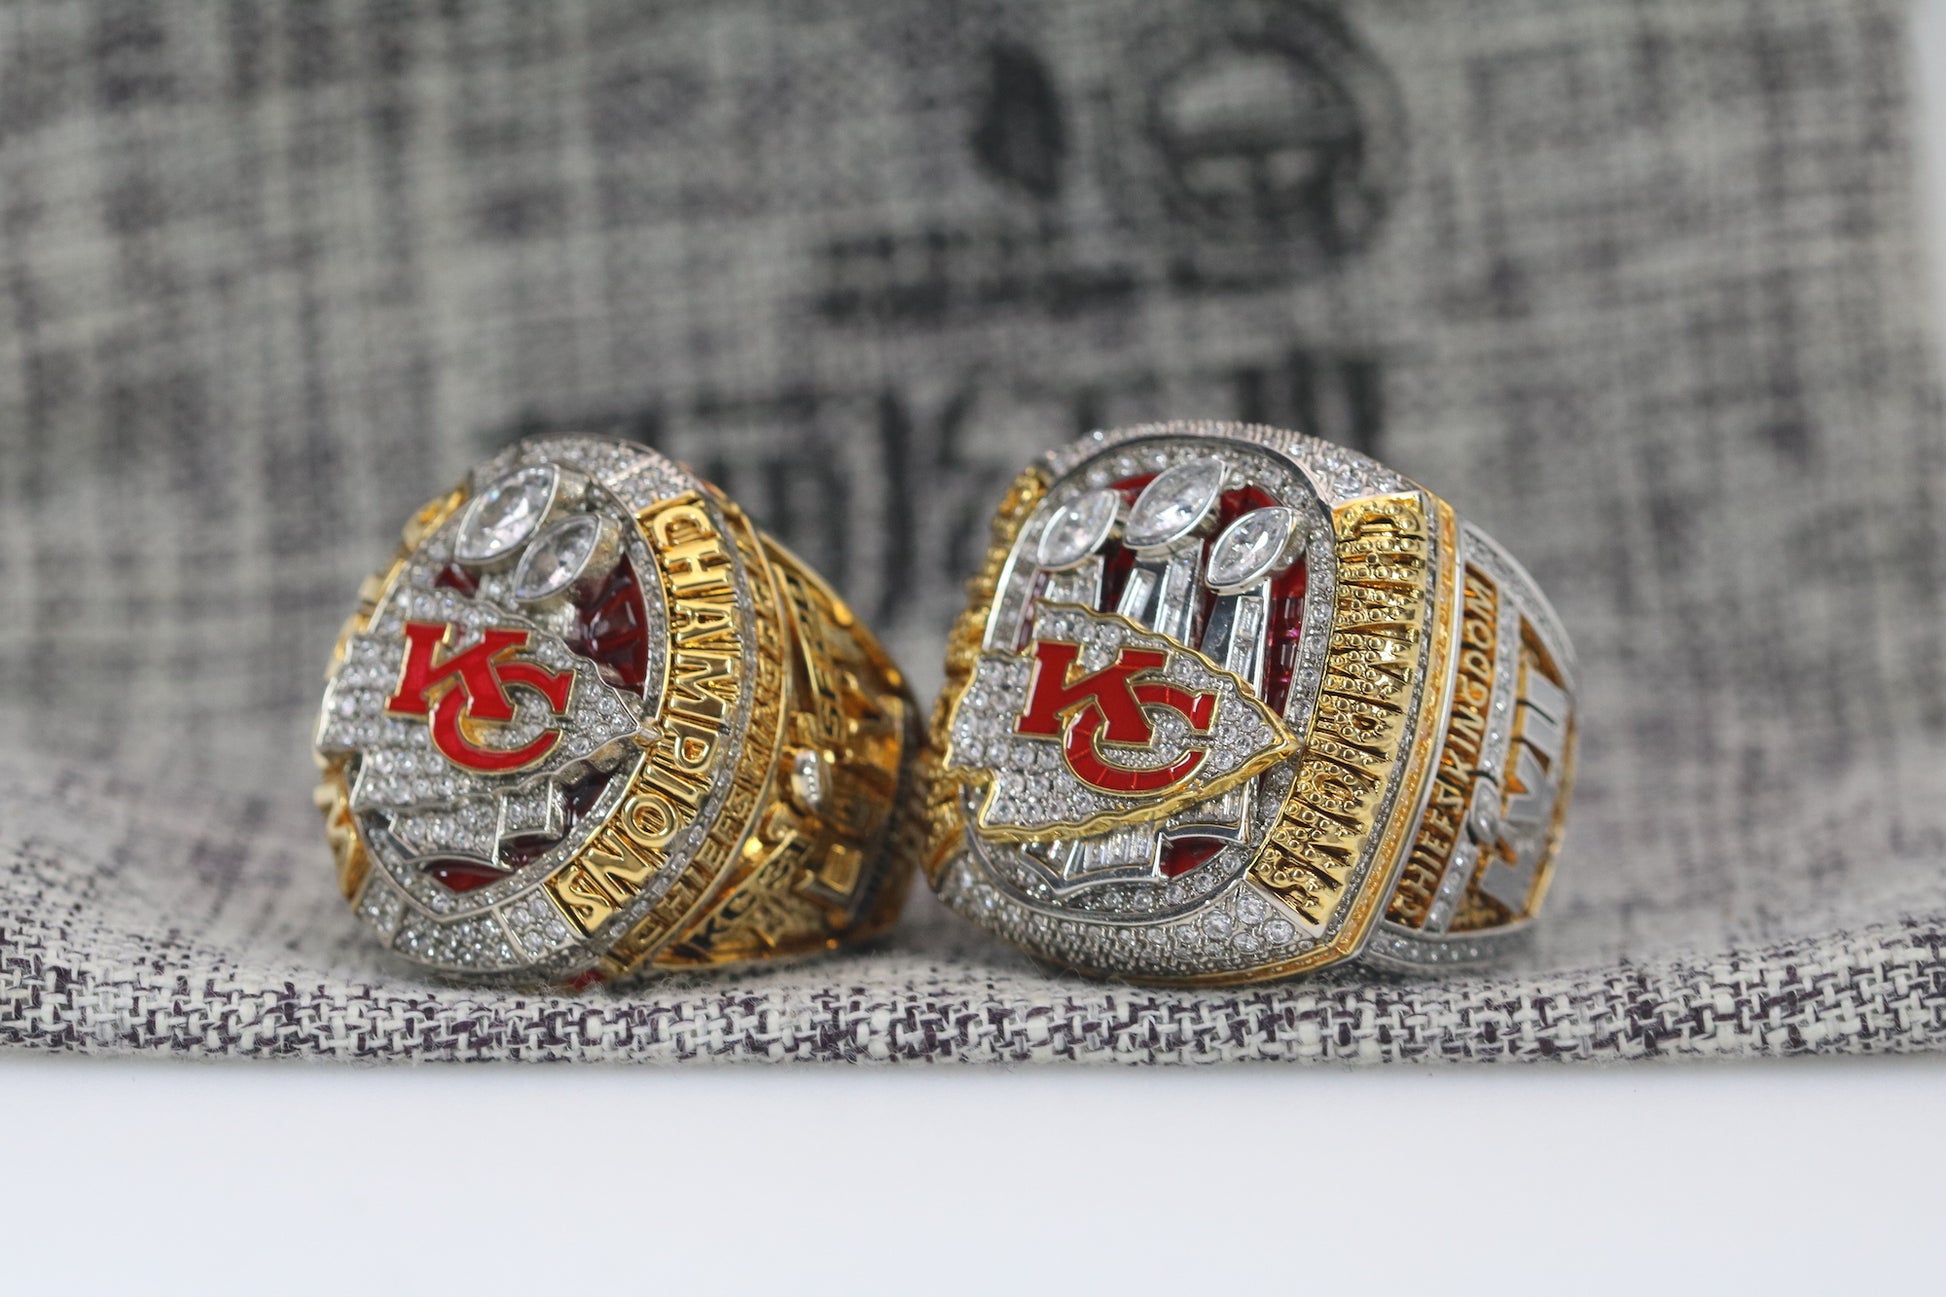 chiefs super bowl ring cost 2020